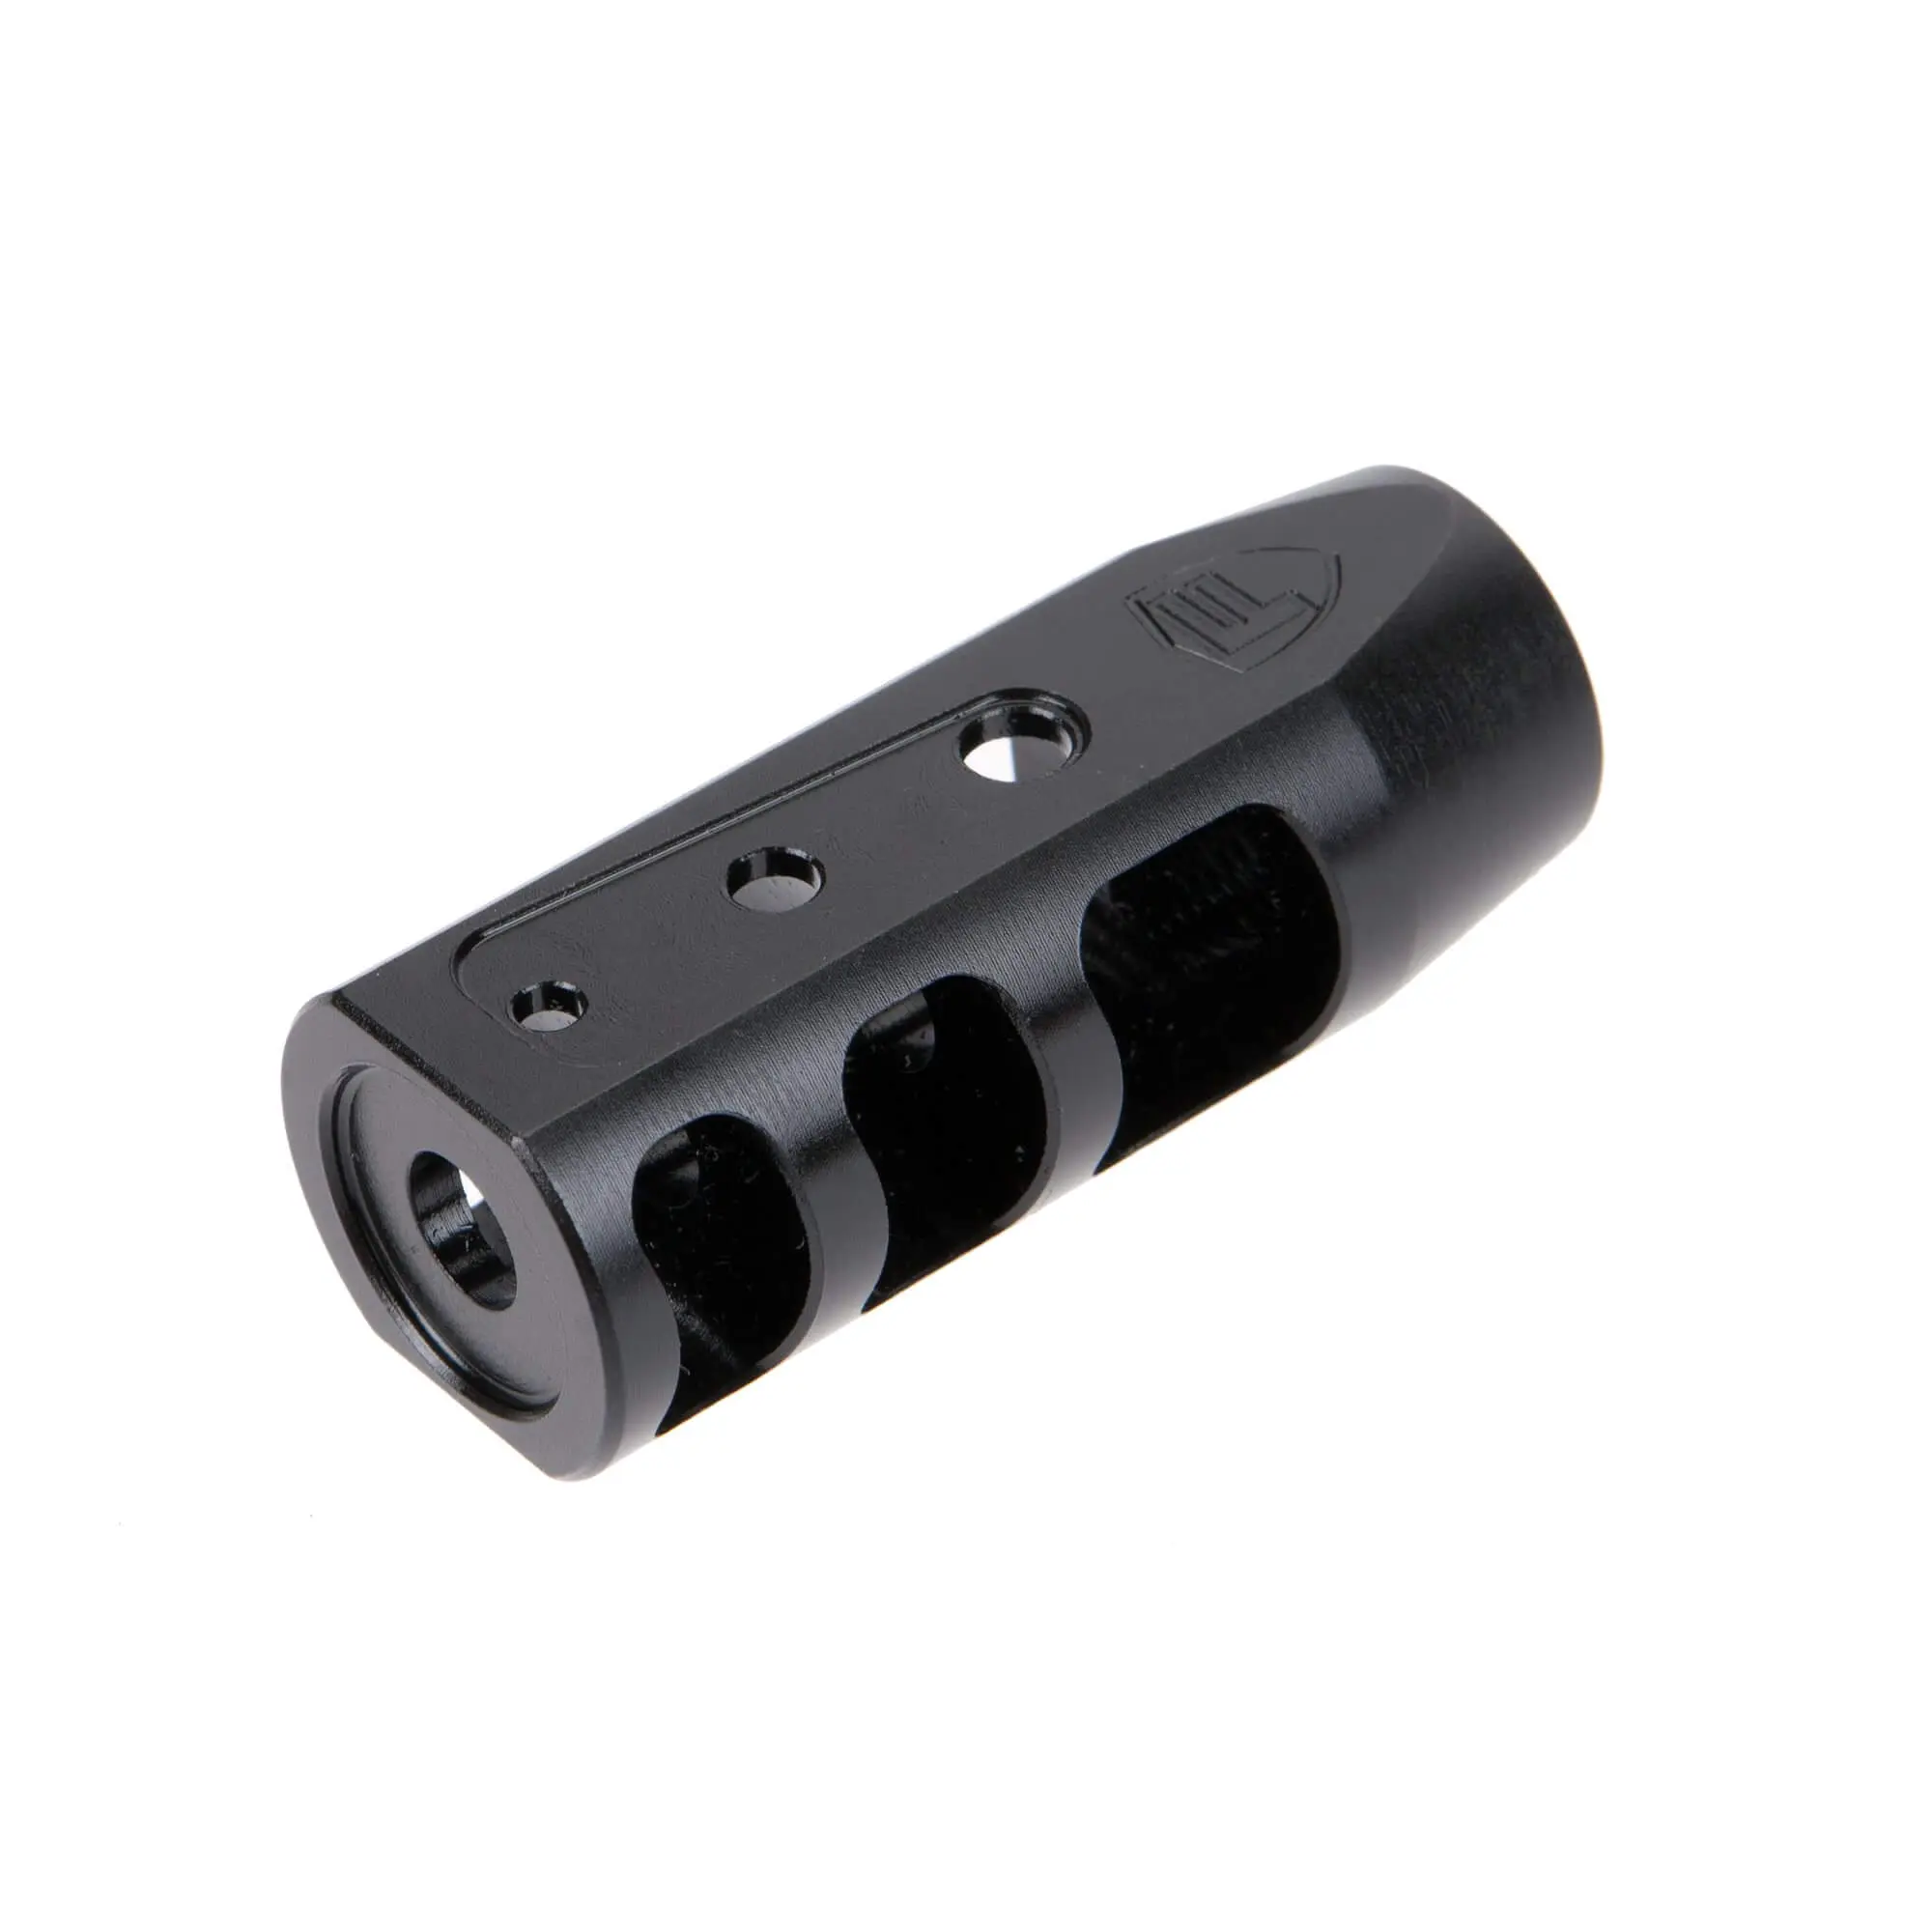 Fortis RED 556 AR 15 Muzzle Brake